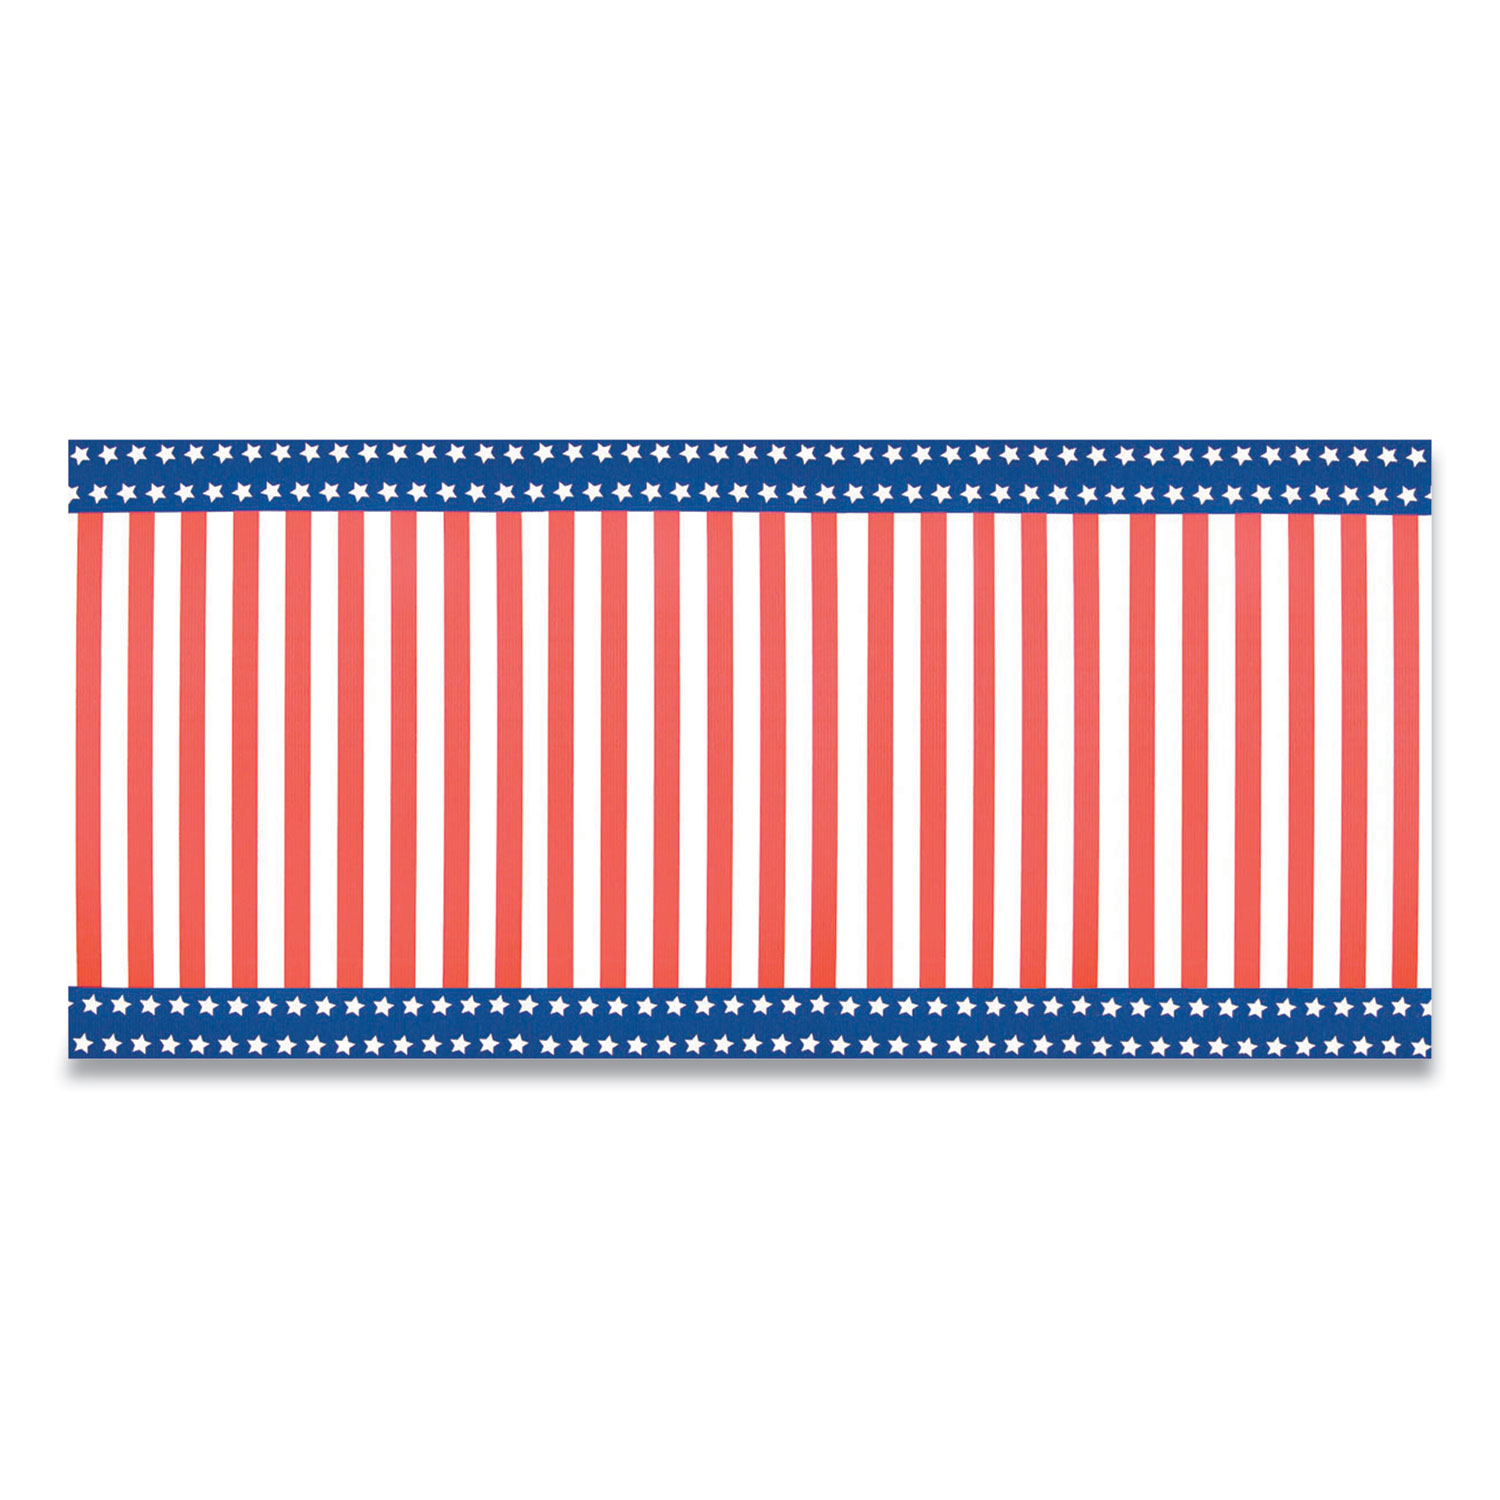  Pacon 0019841 Corobuff Corrugated Paper Roll, 48 x 25 ft, Stars and Stripes (PAC24392415) 